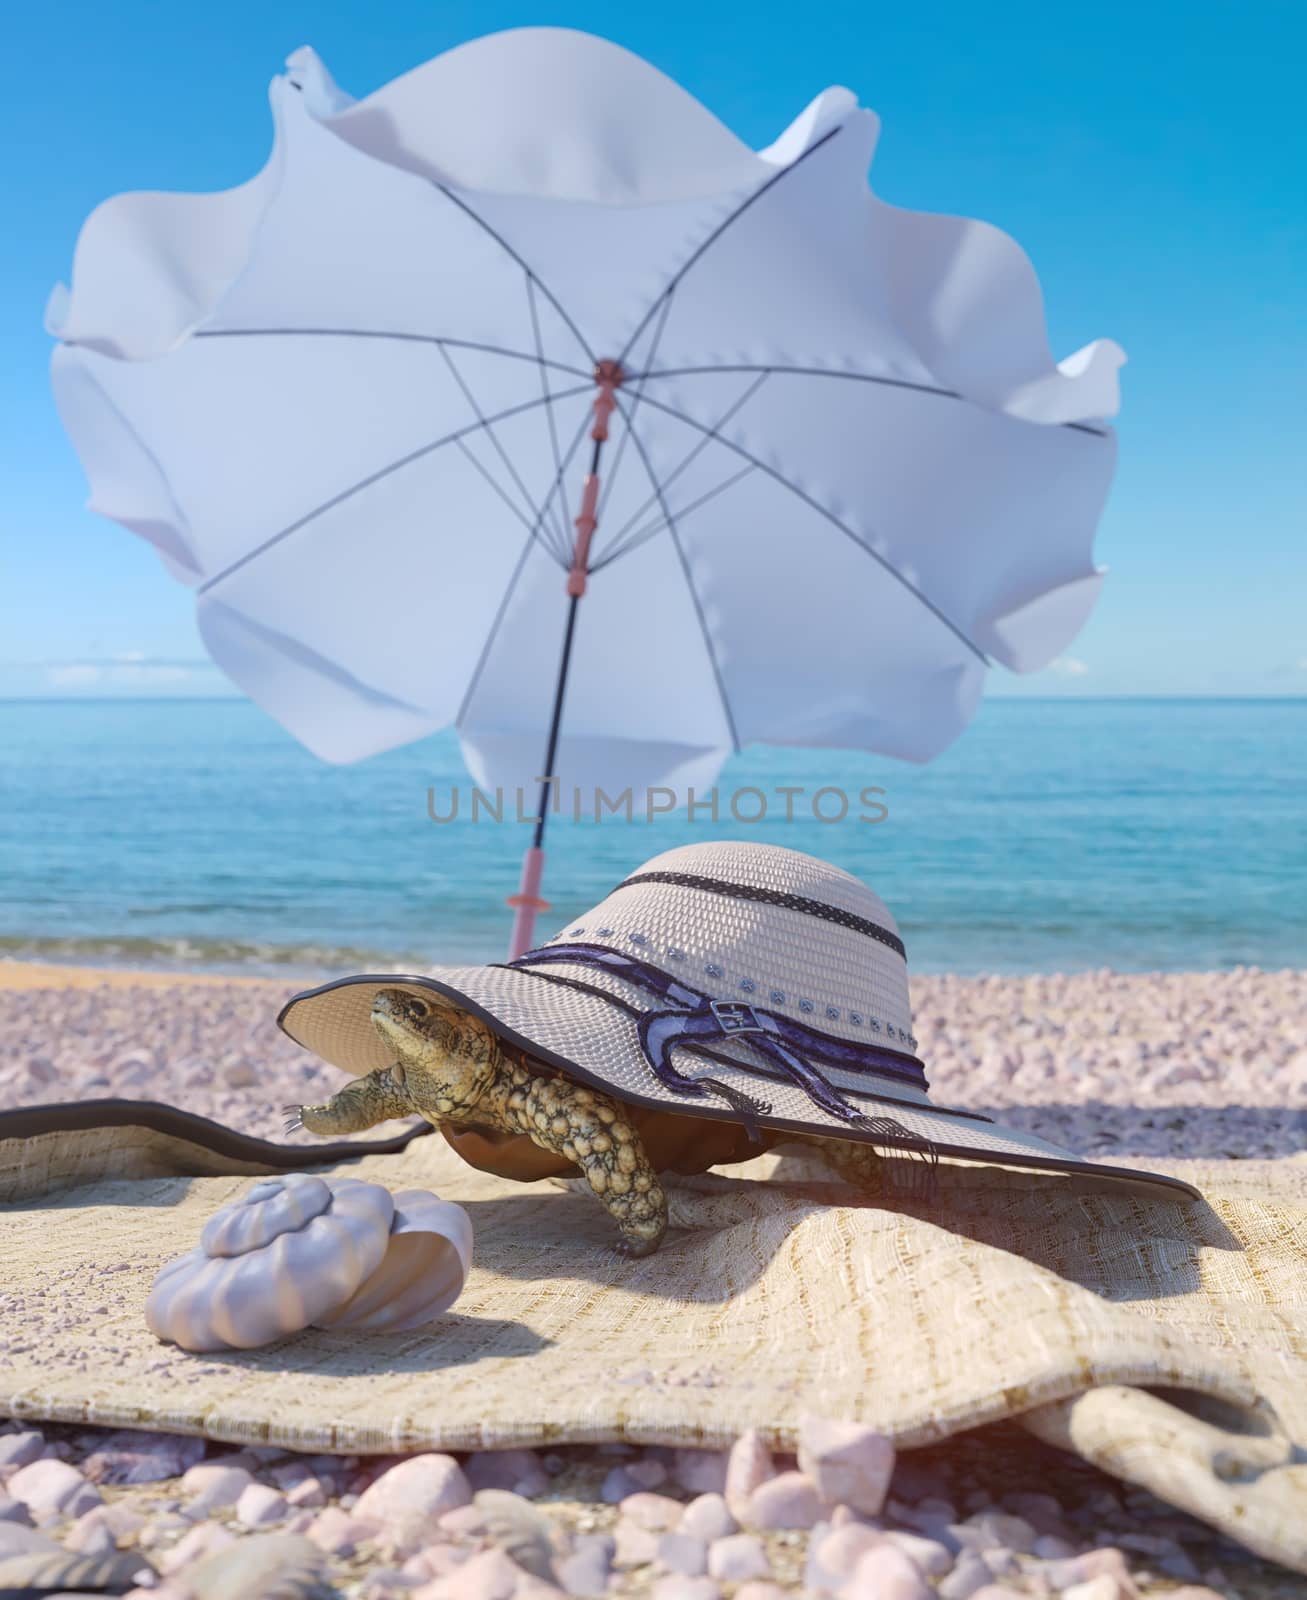 relaxing vacation concept background with seashell,umbrella, turtle and beach accessories